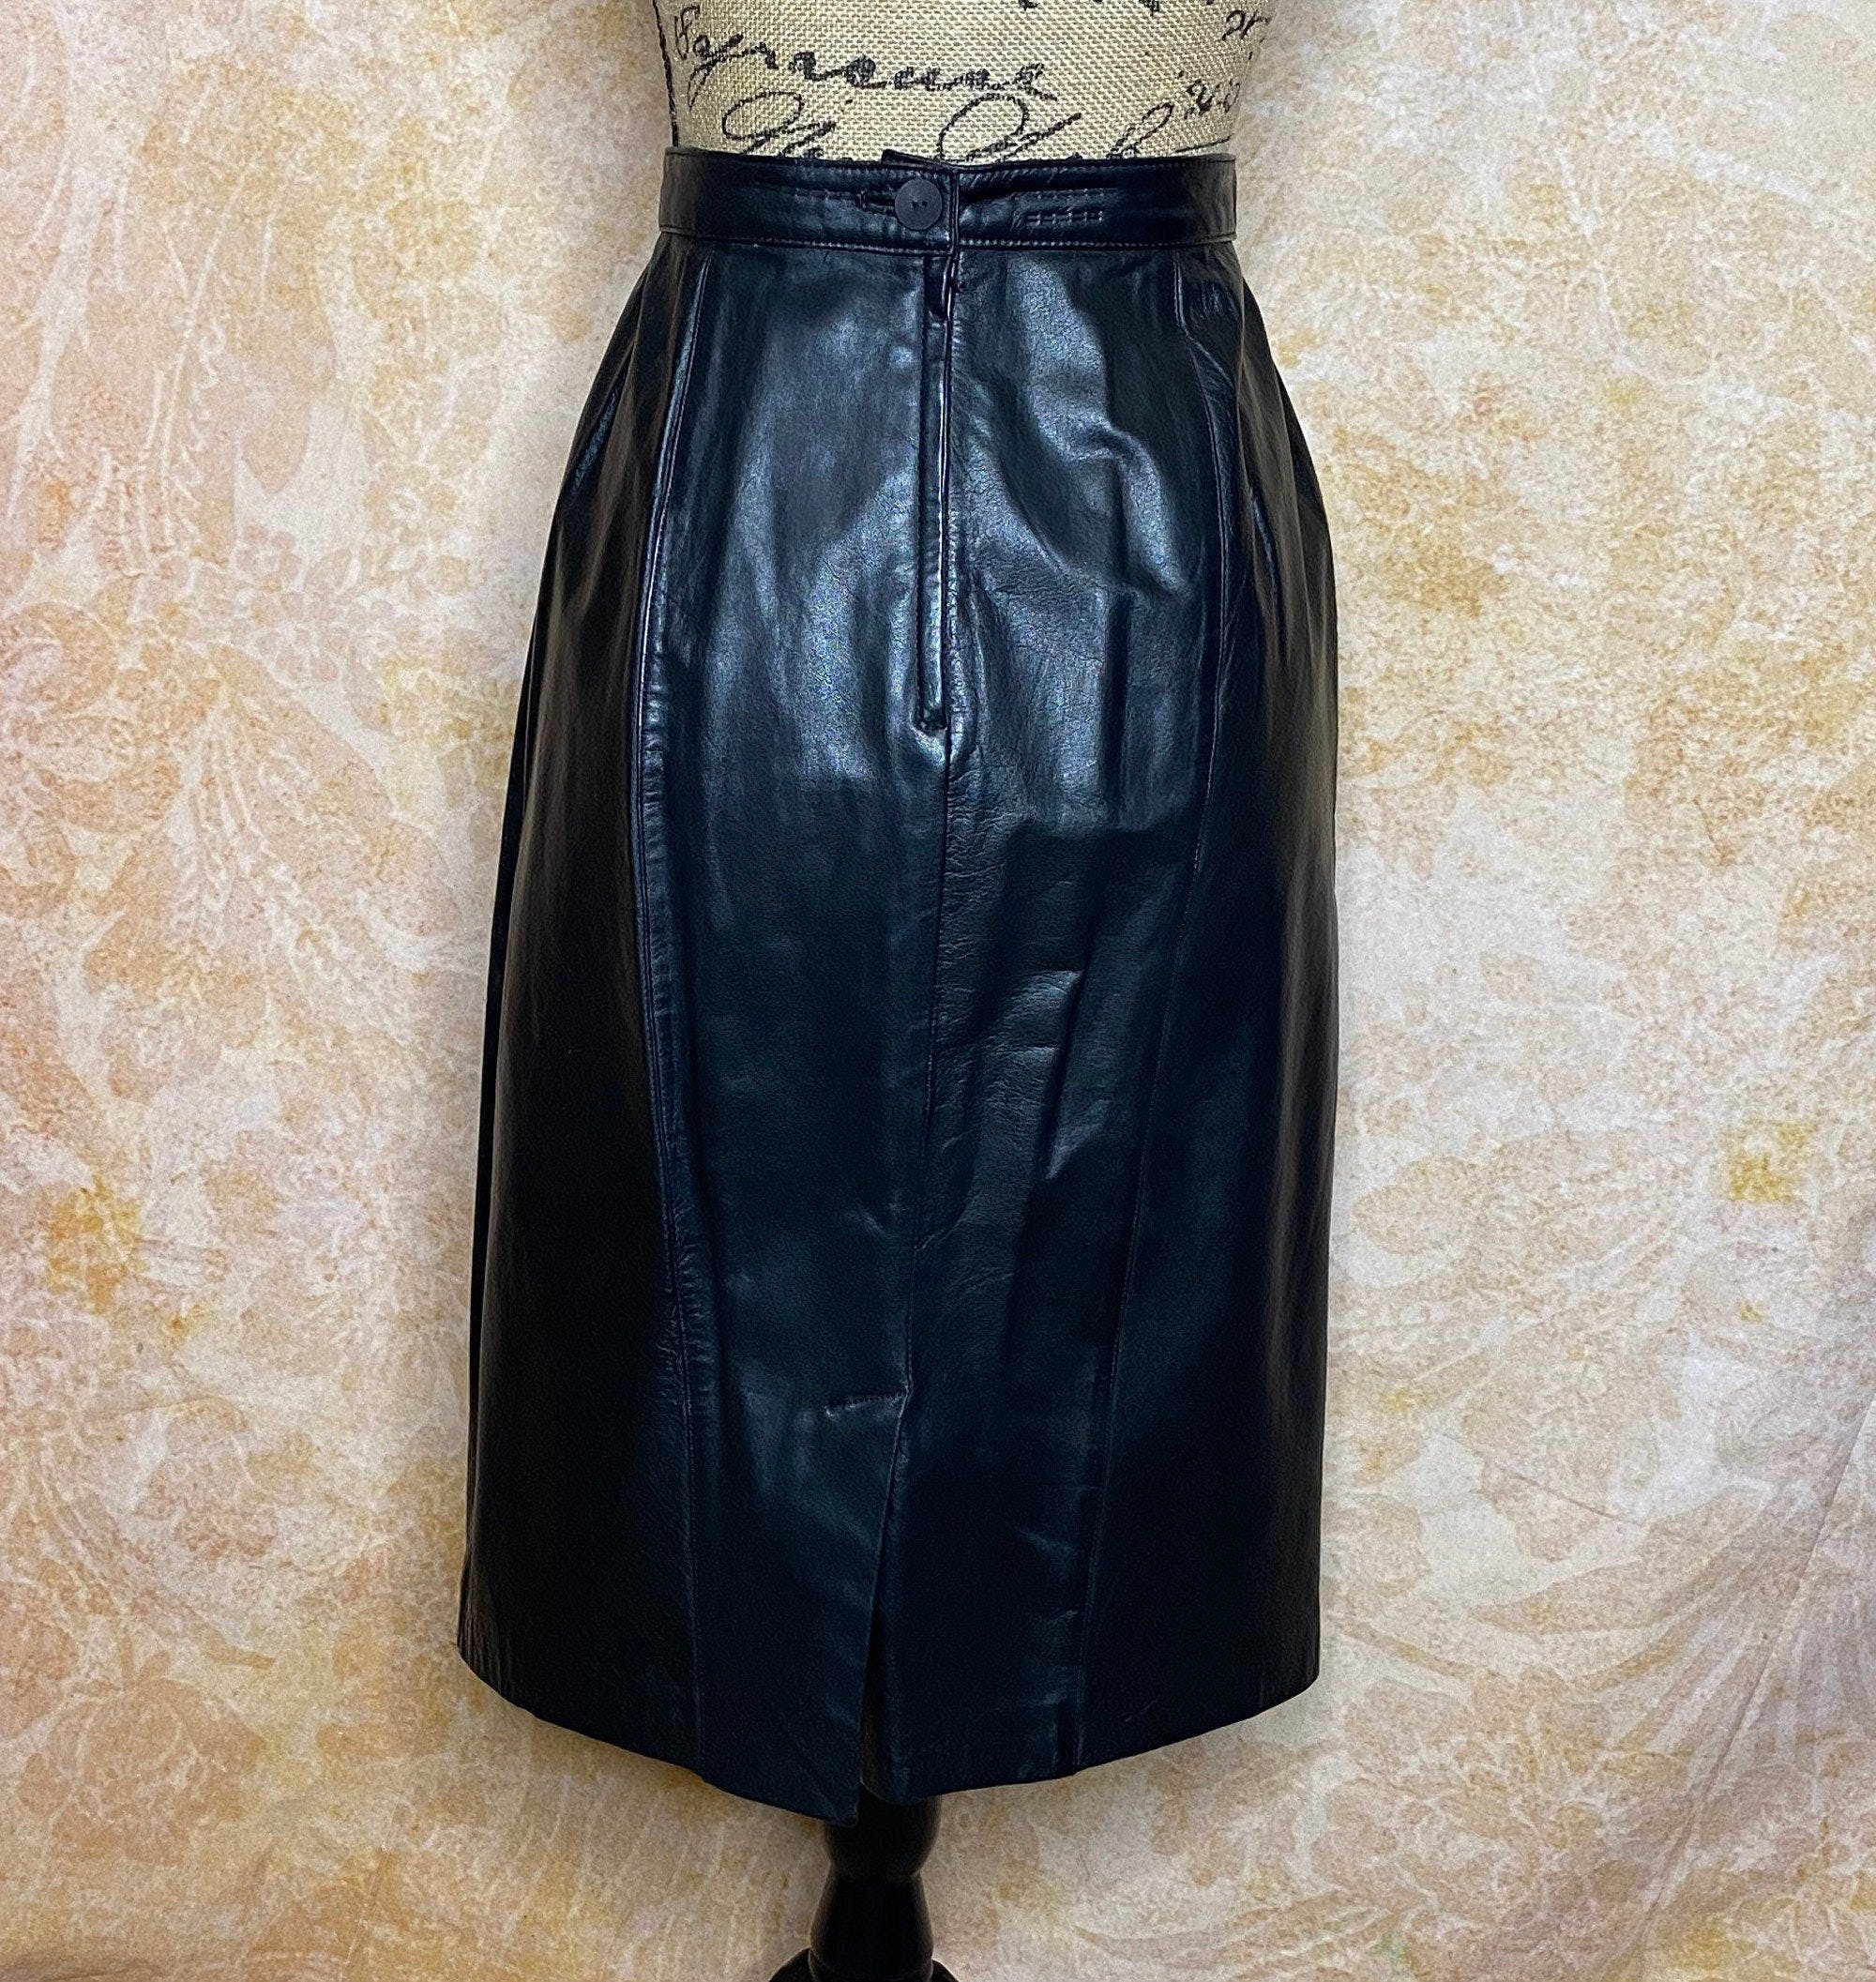 Vintage 80's A-Line Black Leather Skirt by Evan Davies | Shop THRILLING